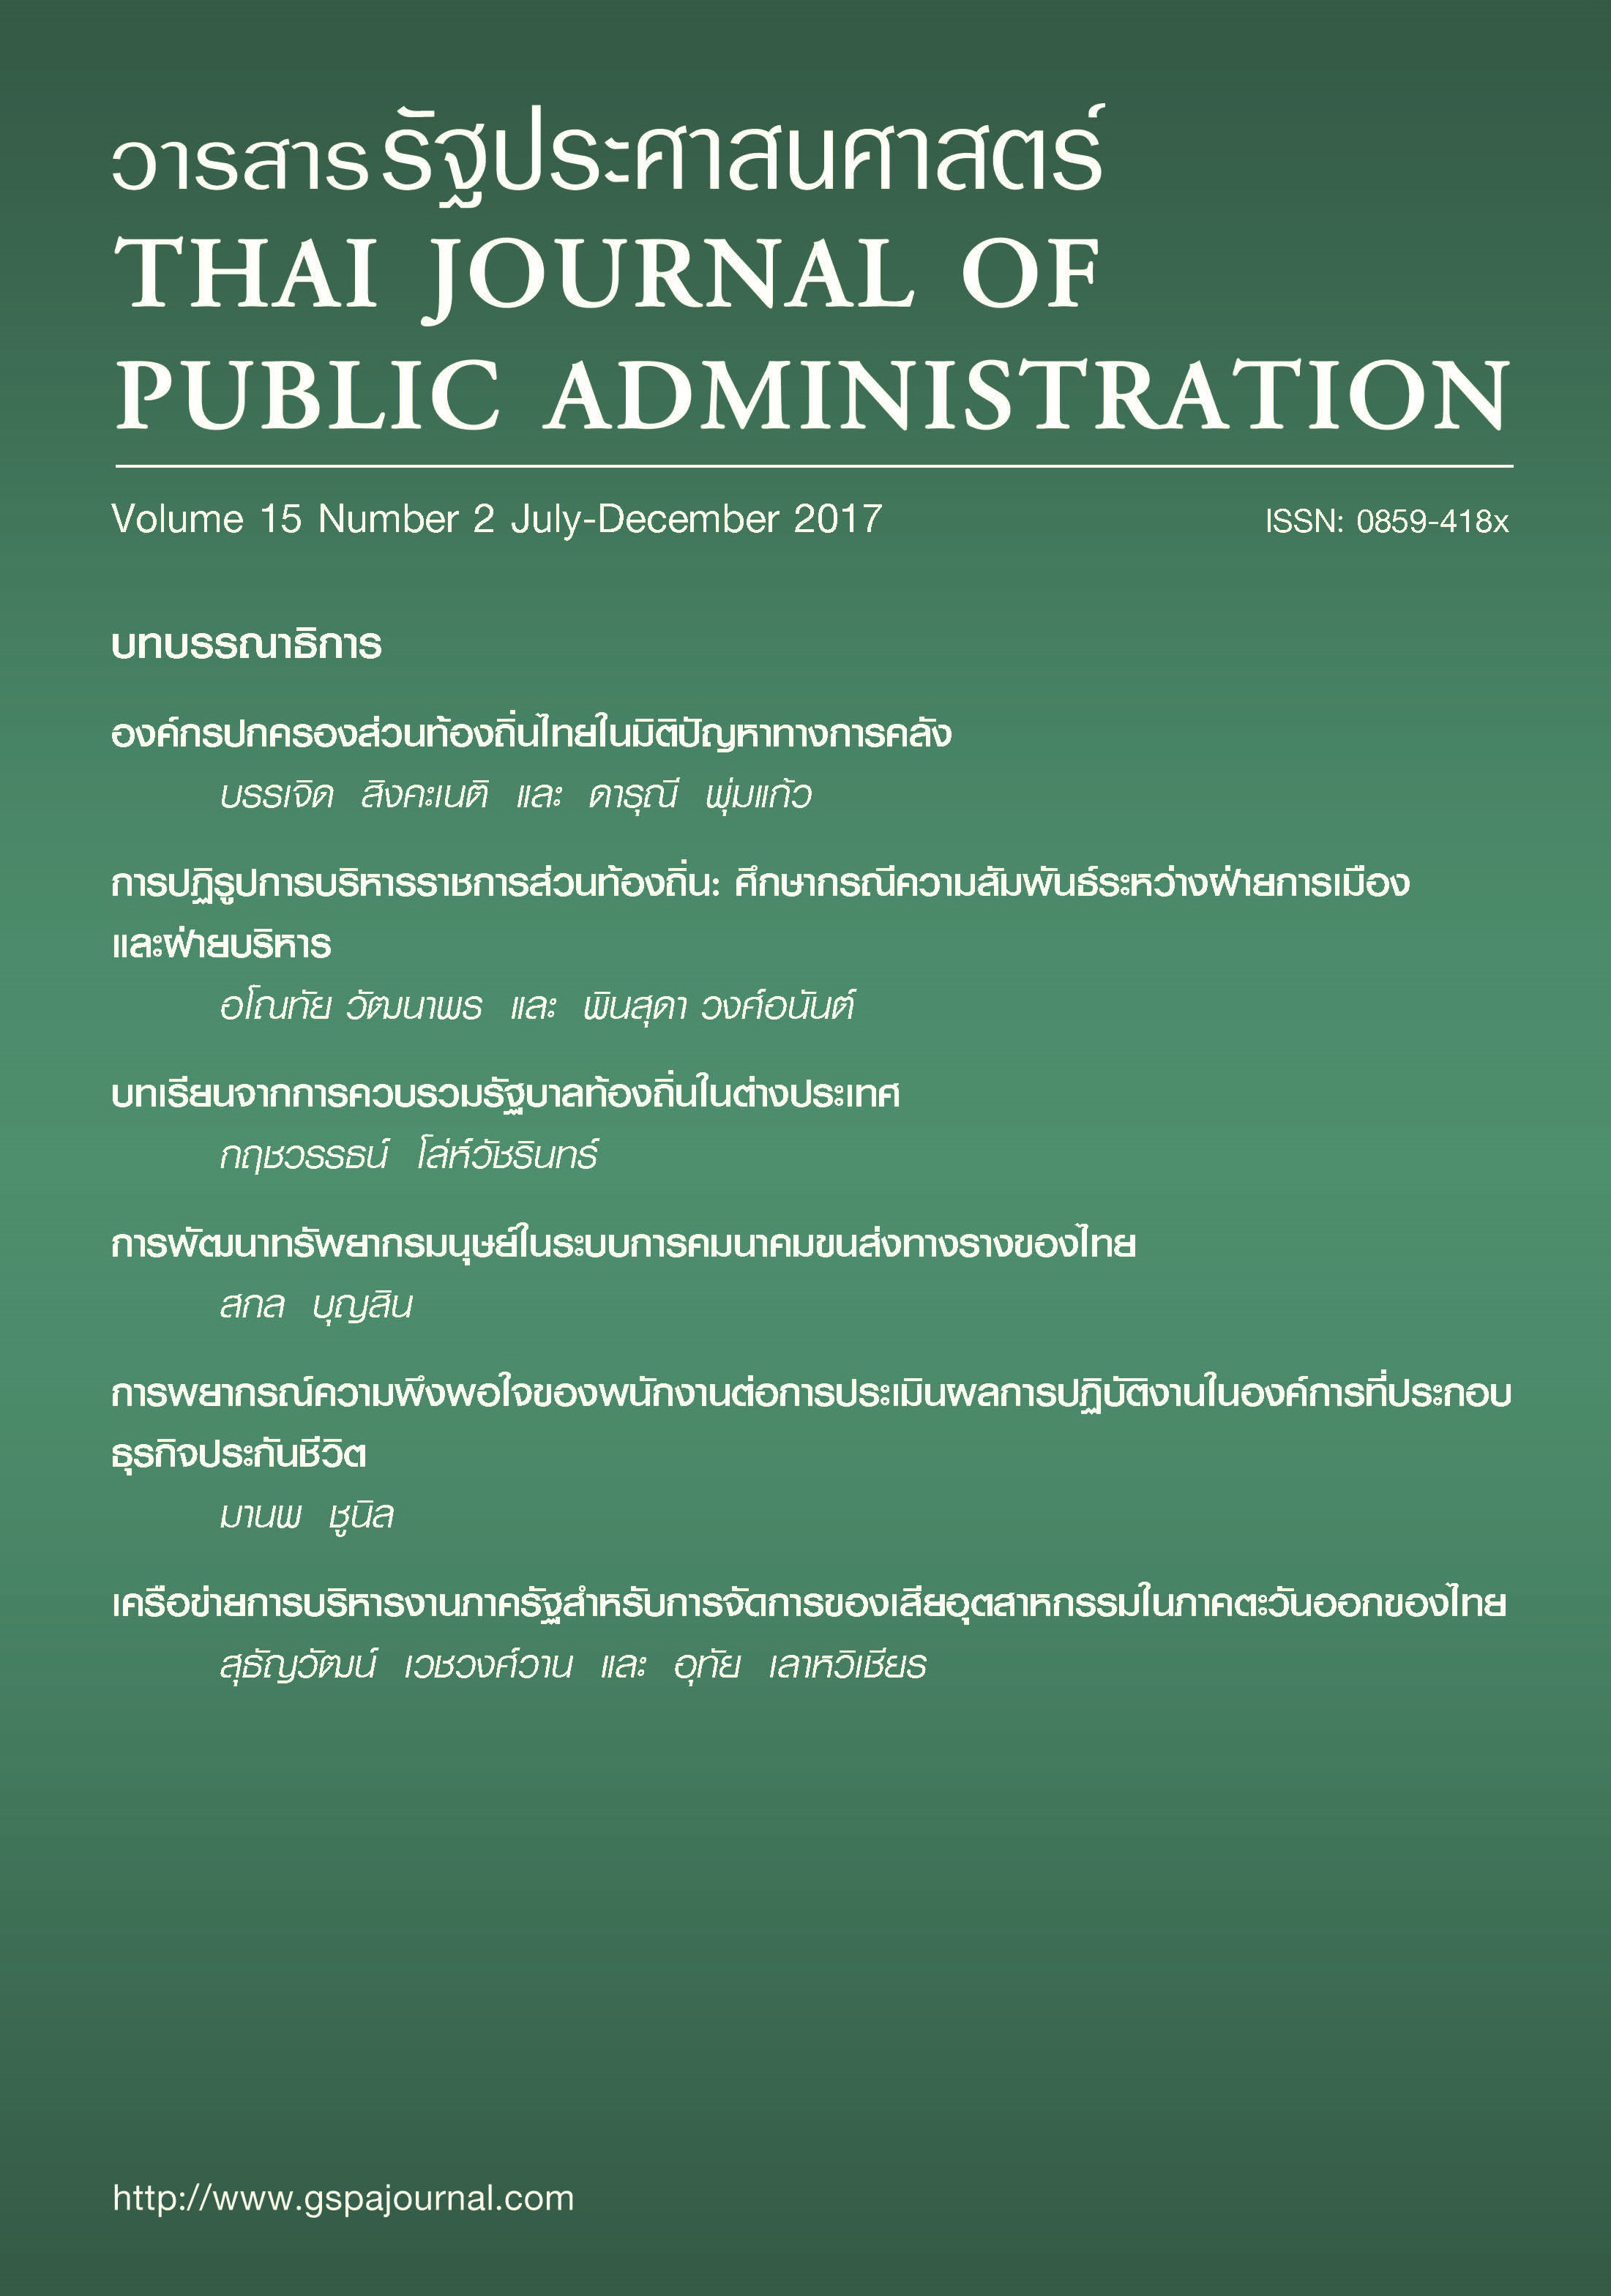 					View Vol. 15 No. 2 (2017): Thai Journal of Public Administration Volume 15 Number 2
				